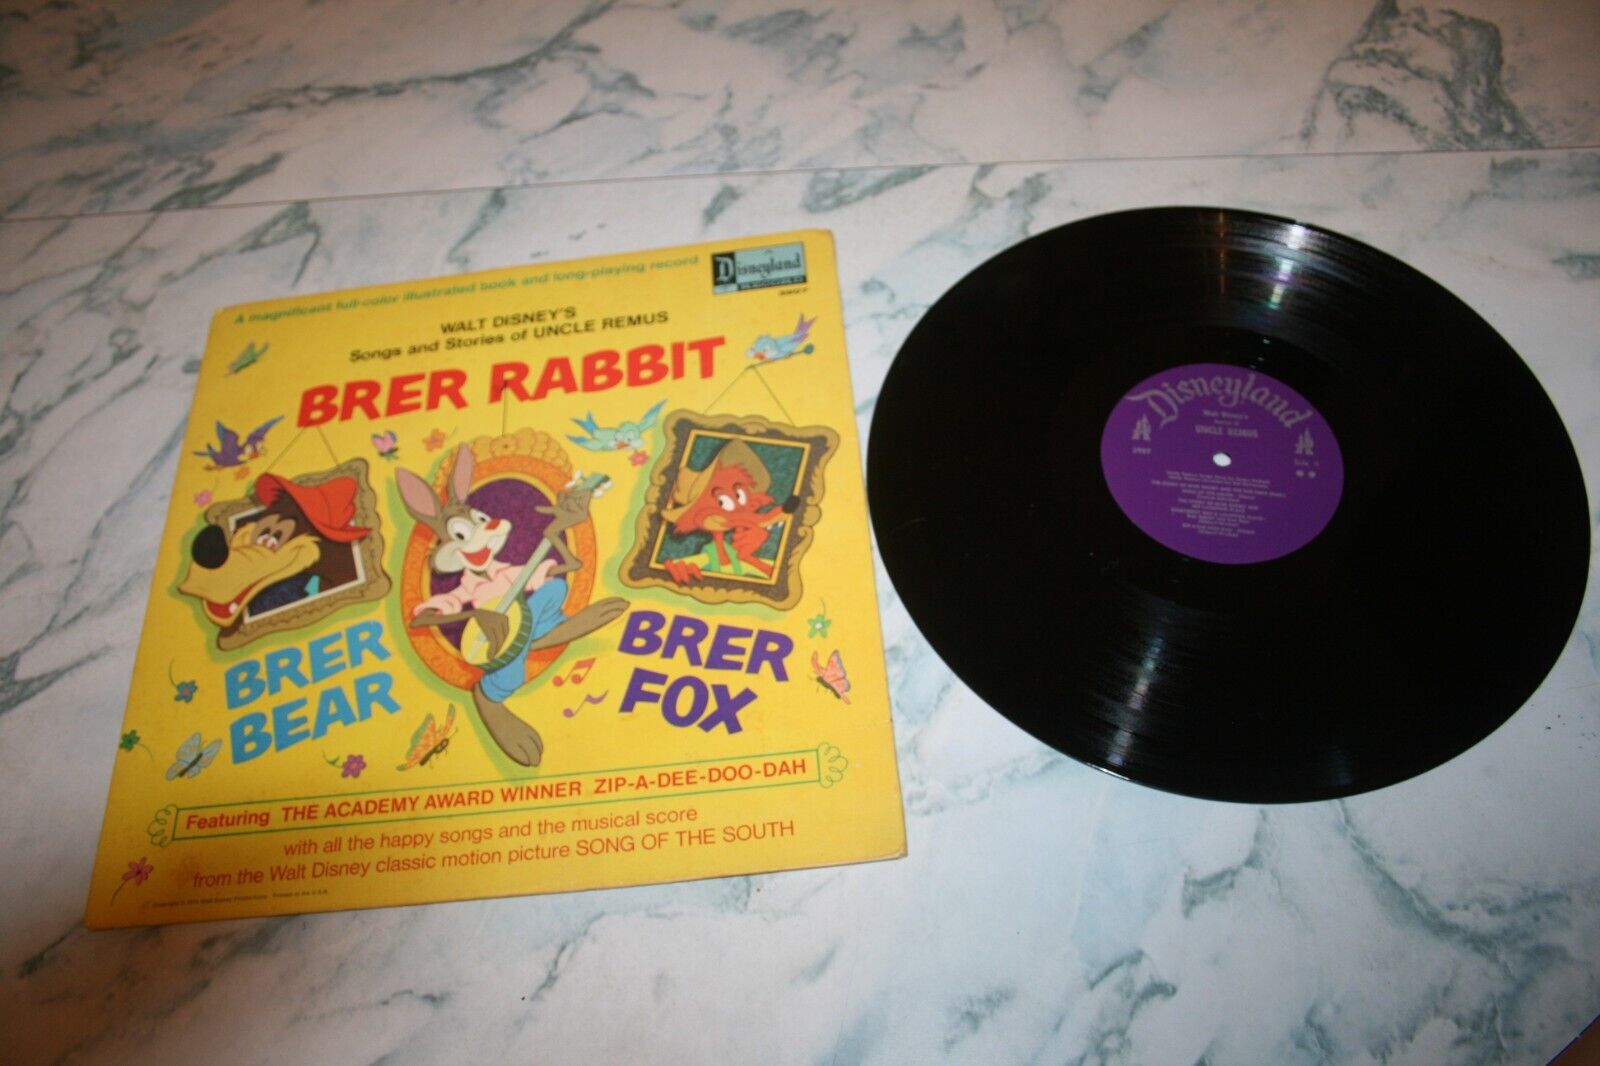 Vintage Disney Land Records 1970 Songs And Stories Of Uncle Remus Brer Rabbit